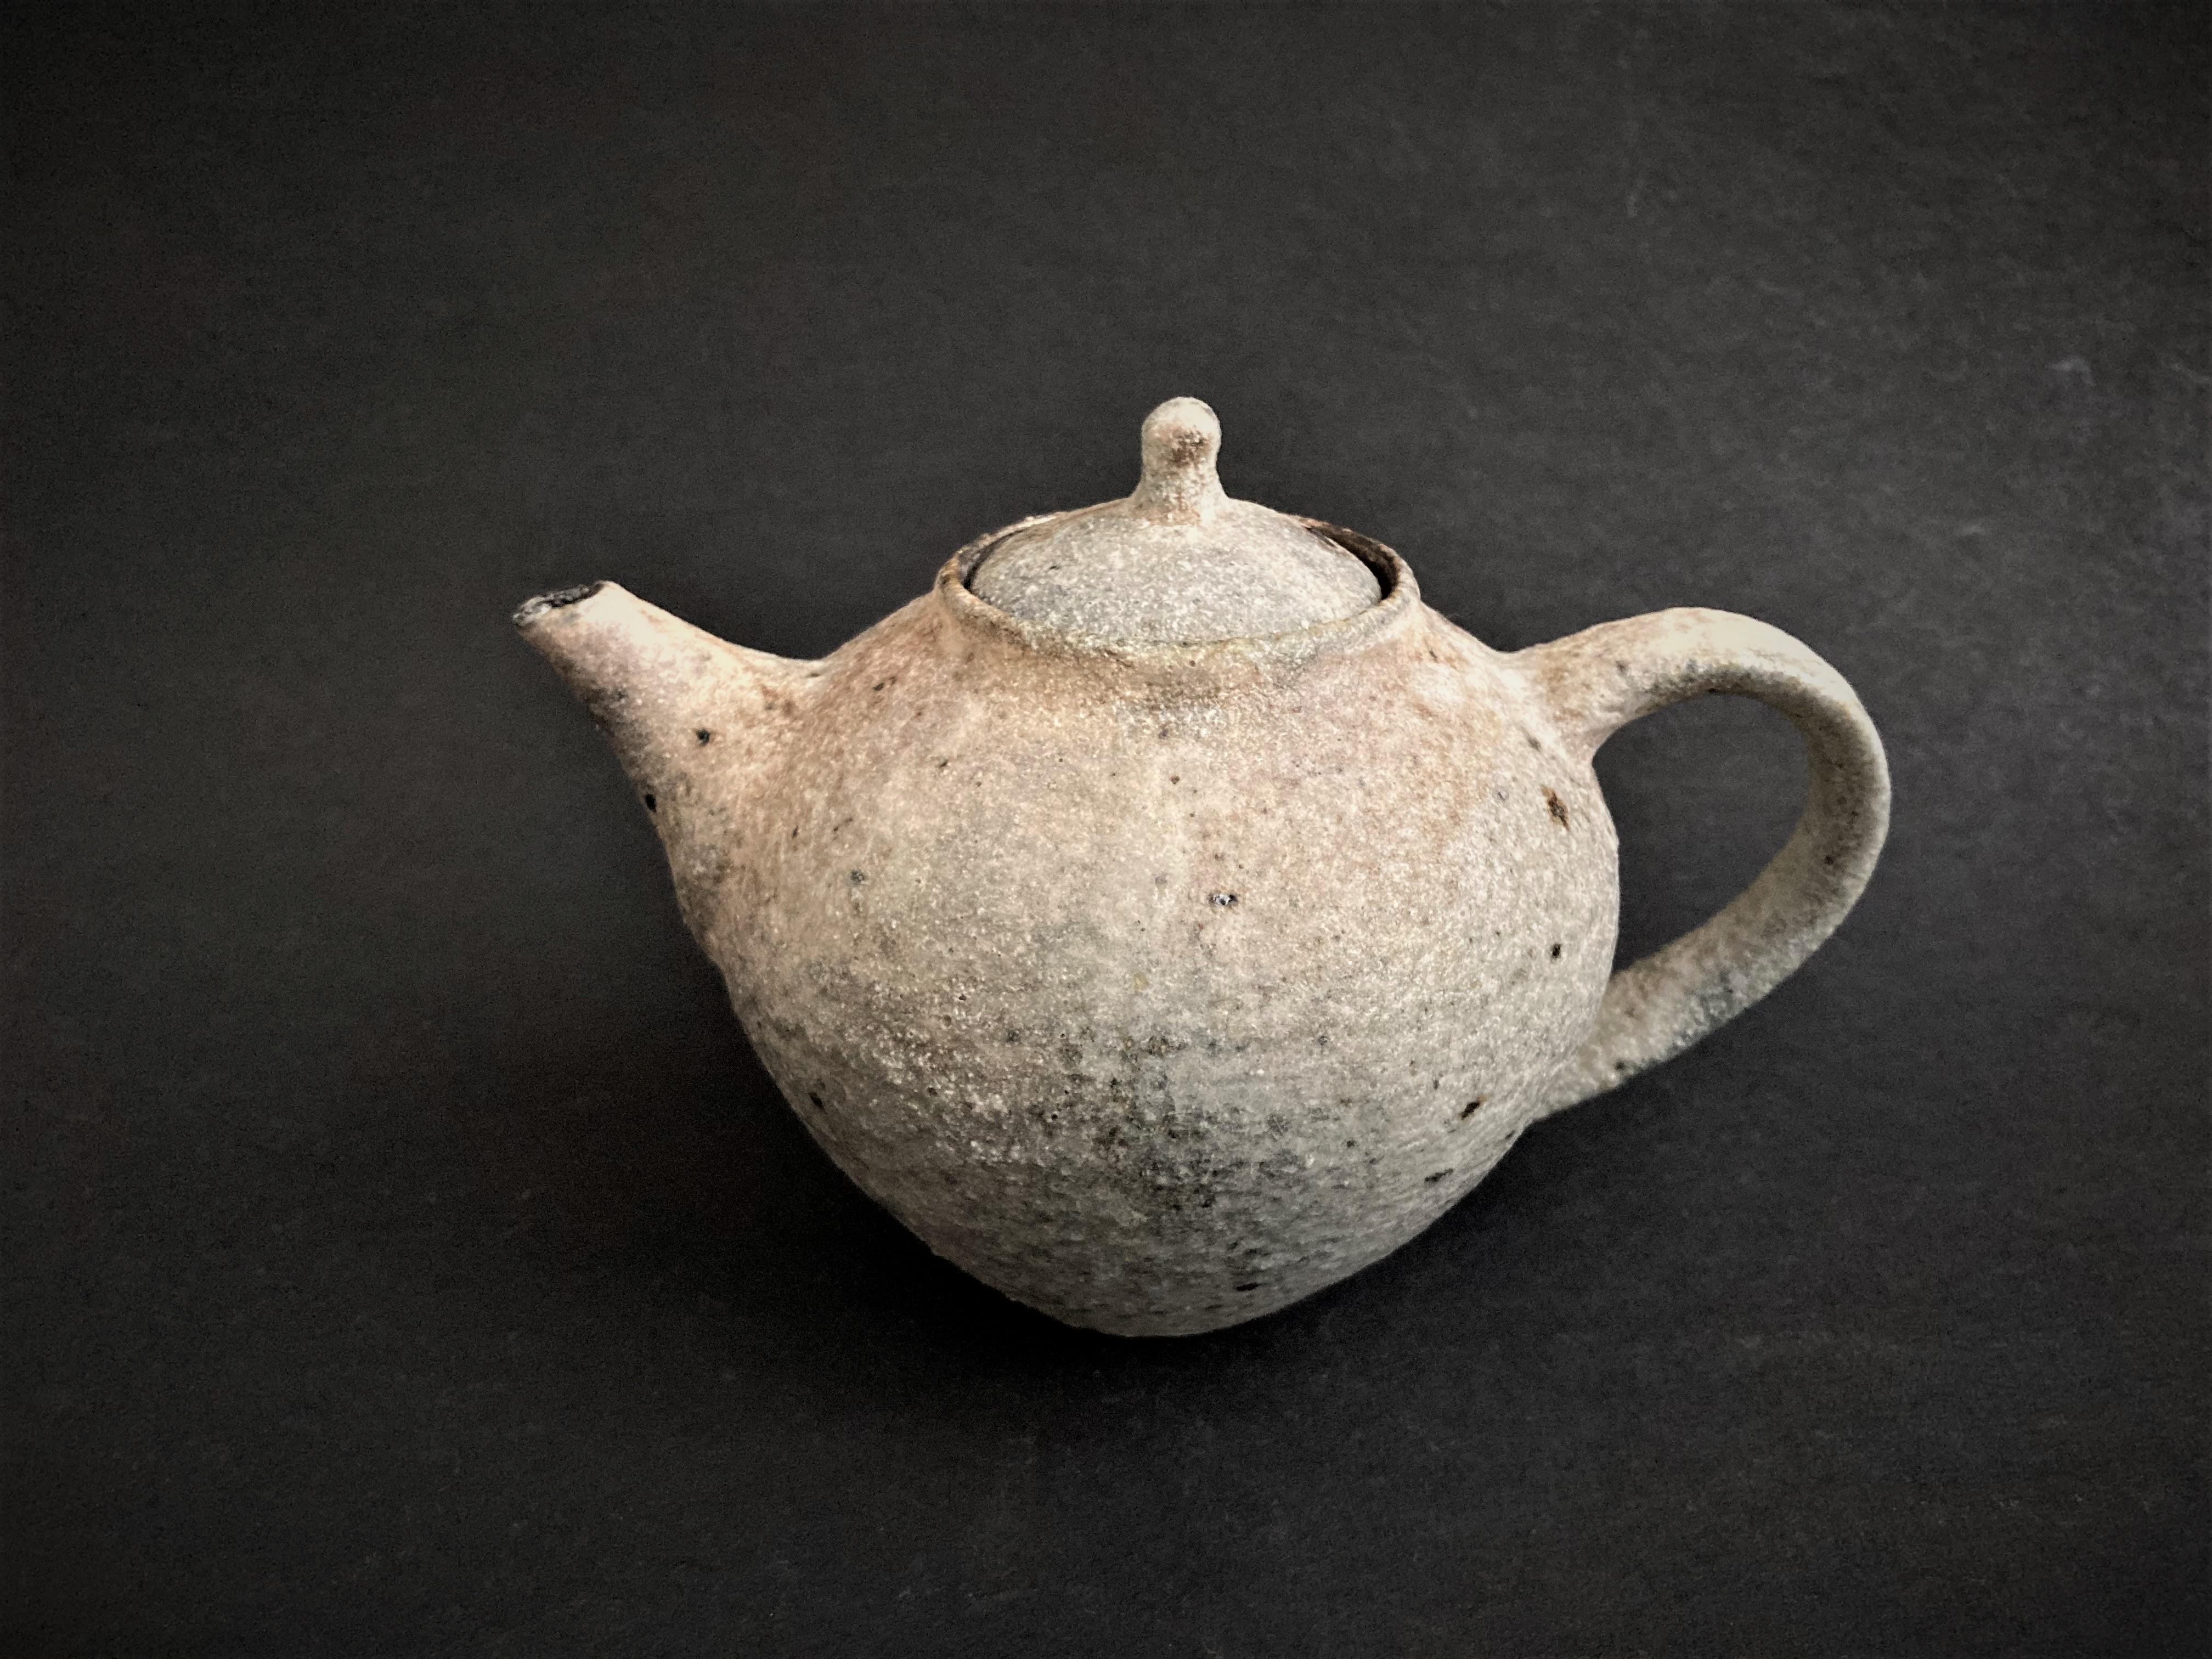 White tea pot by Toru Hatta
Unique Piece
Dimensions: Diameter 11 x Height 12.5 cm
Material: Handmade Ceramic. 

Lead time may vary.

Holds up to 600ml. 


Toru Hatta was both in Kanazawa in 1977. His love of antiques and old wares lends